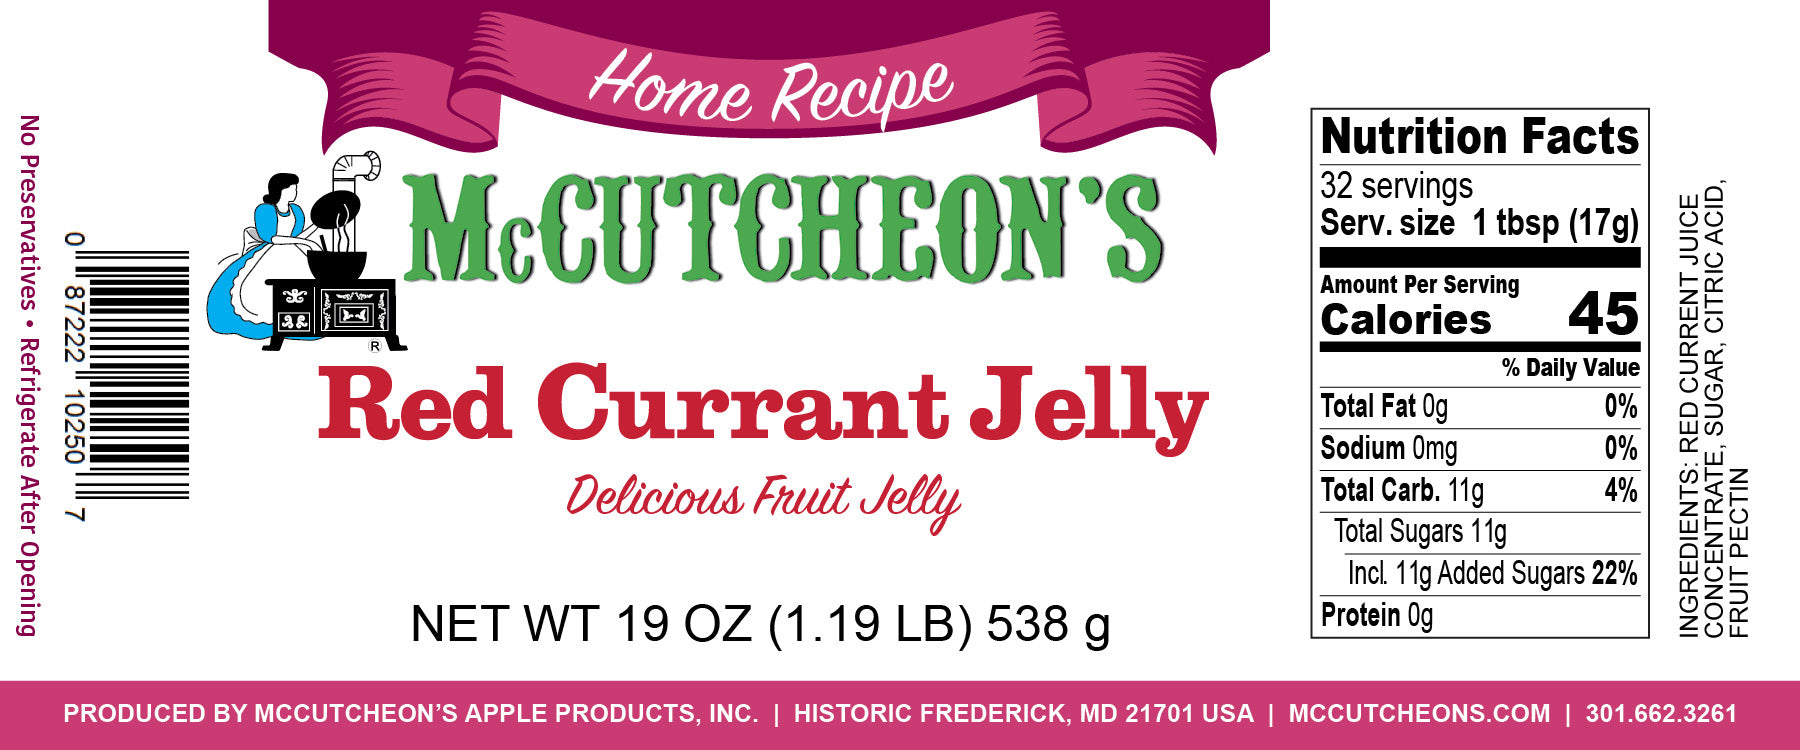 nutrition label for McCutcheon's red currant jelly